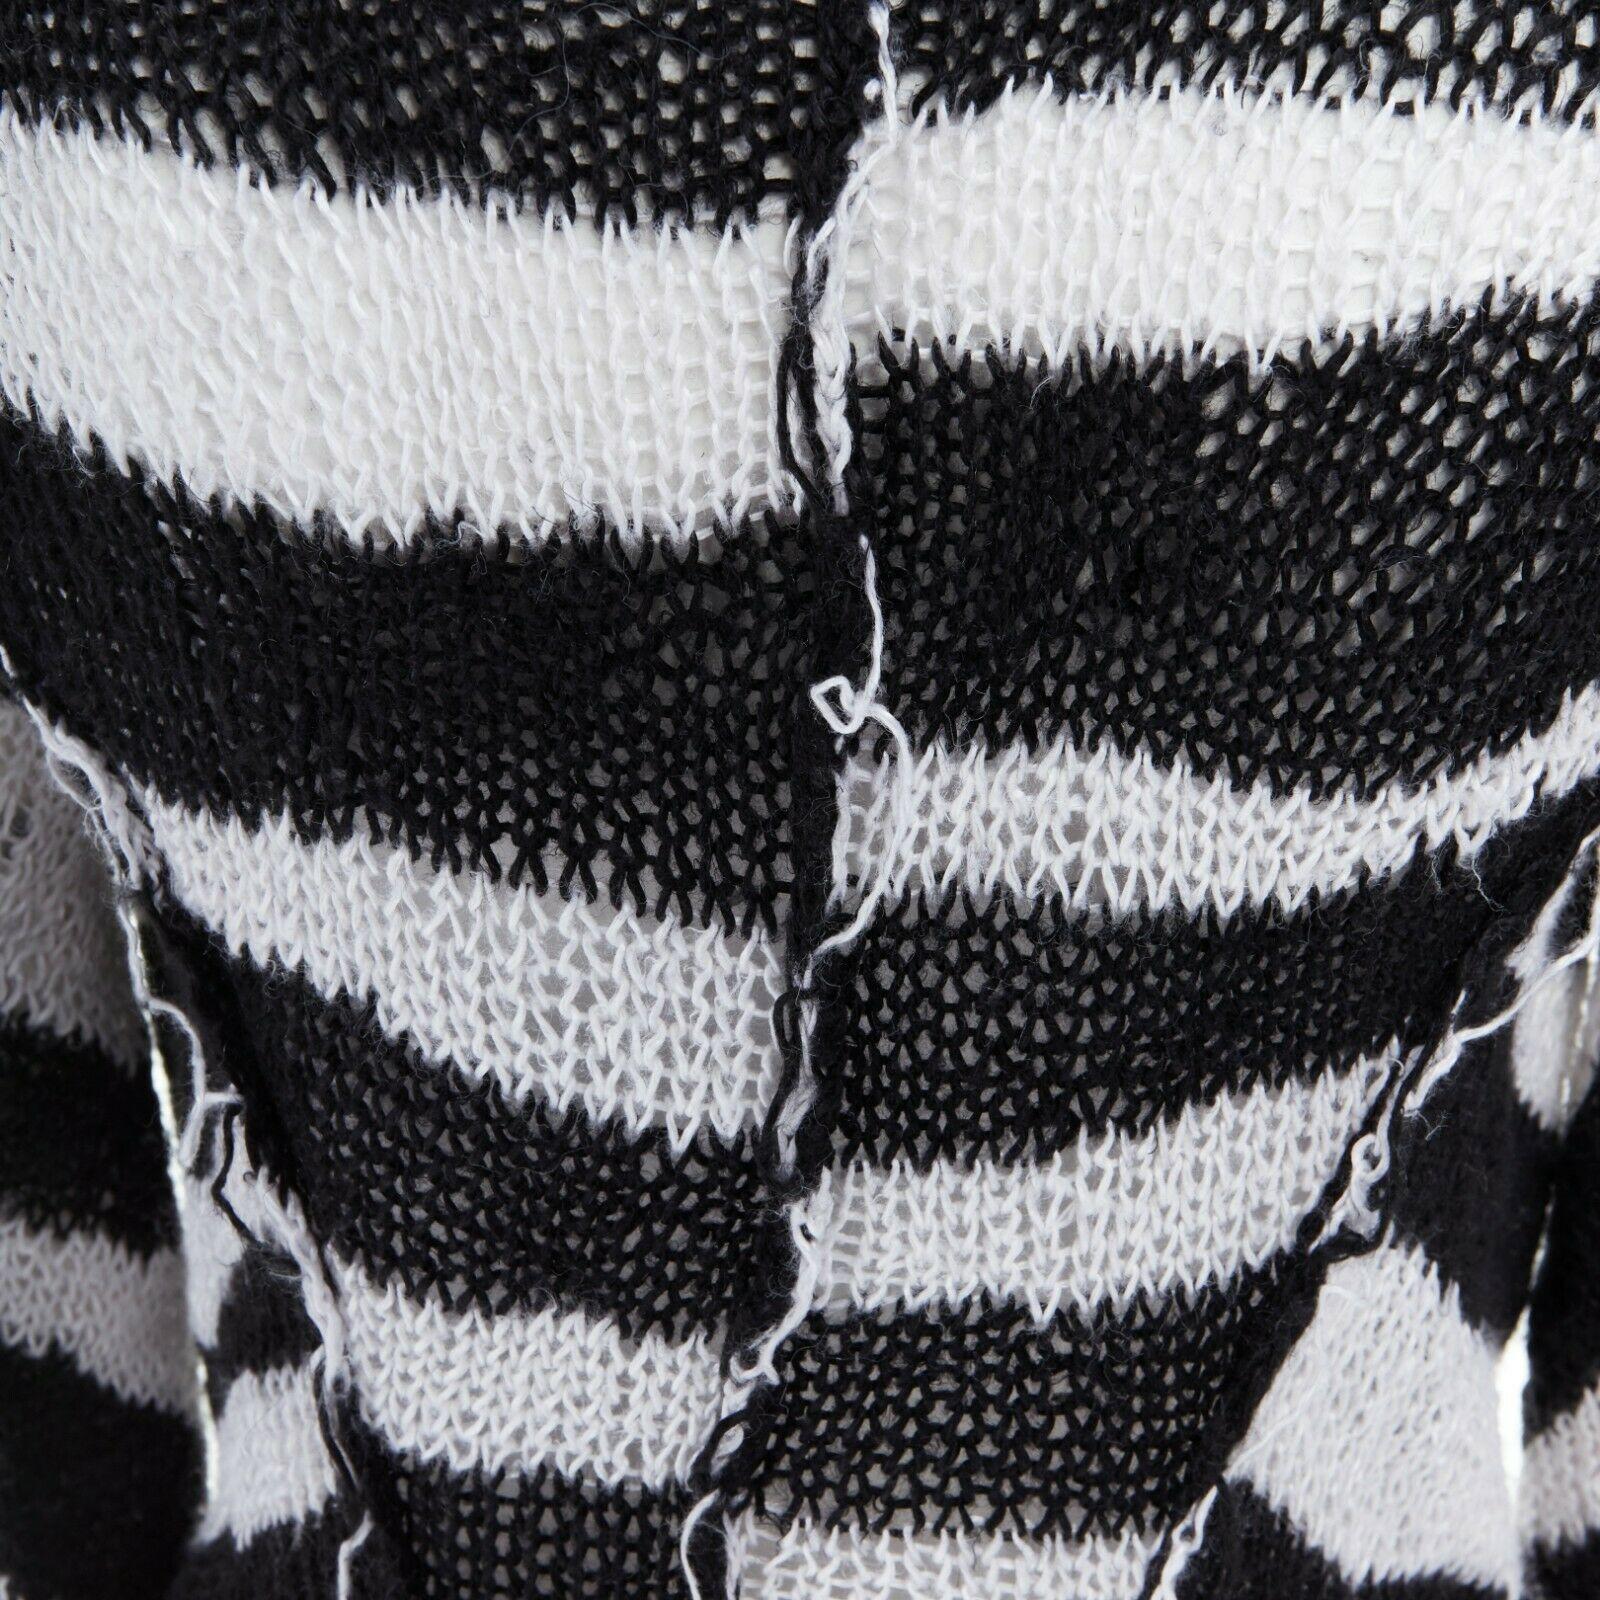 ANN DEMEULEMEESTER 100% linen black white stripe holey knit punk cardigan FR36 S

ANN DEMEULEMEESTER
100% linen. Black white stripe. Open front. Raw thread. Holey hem. Punk-inspired cardigan. Made in Belgium.

CONDITION
Very good, this item was